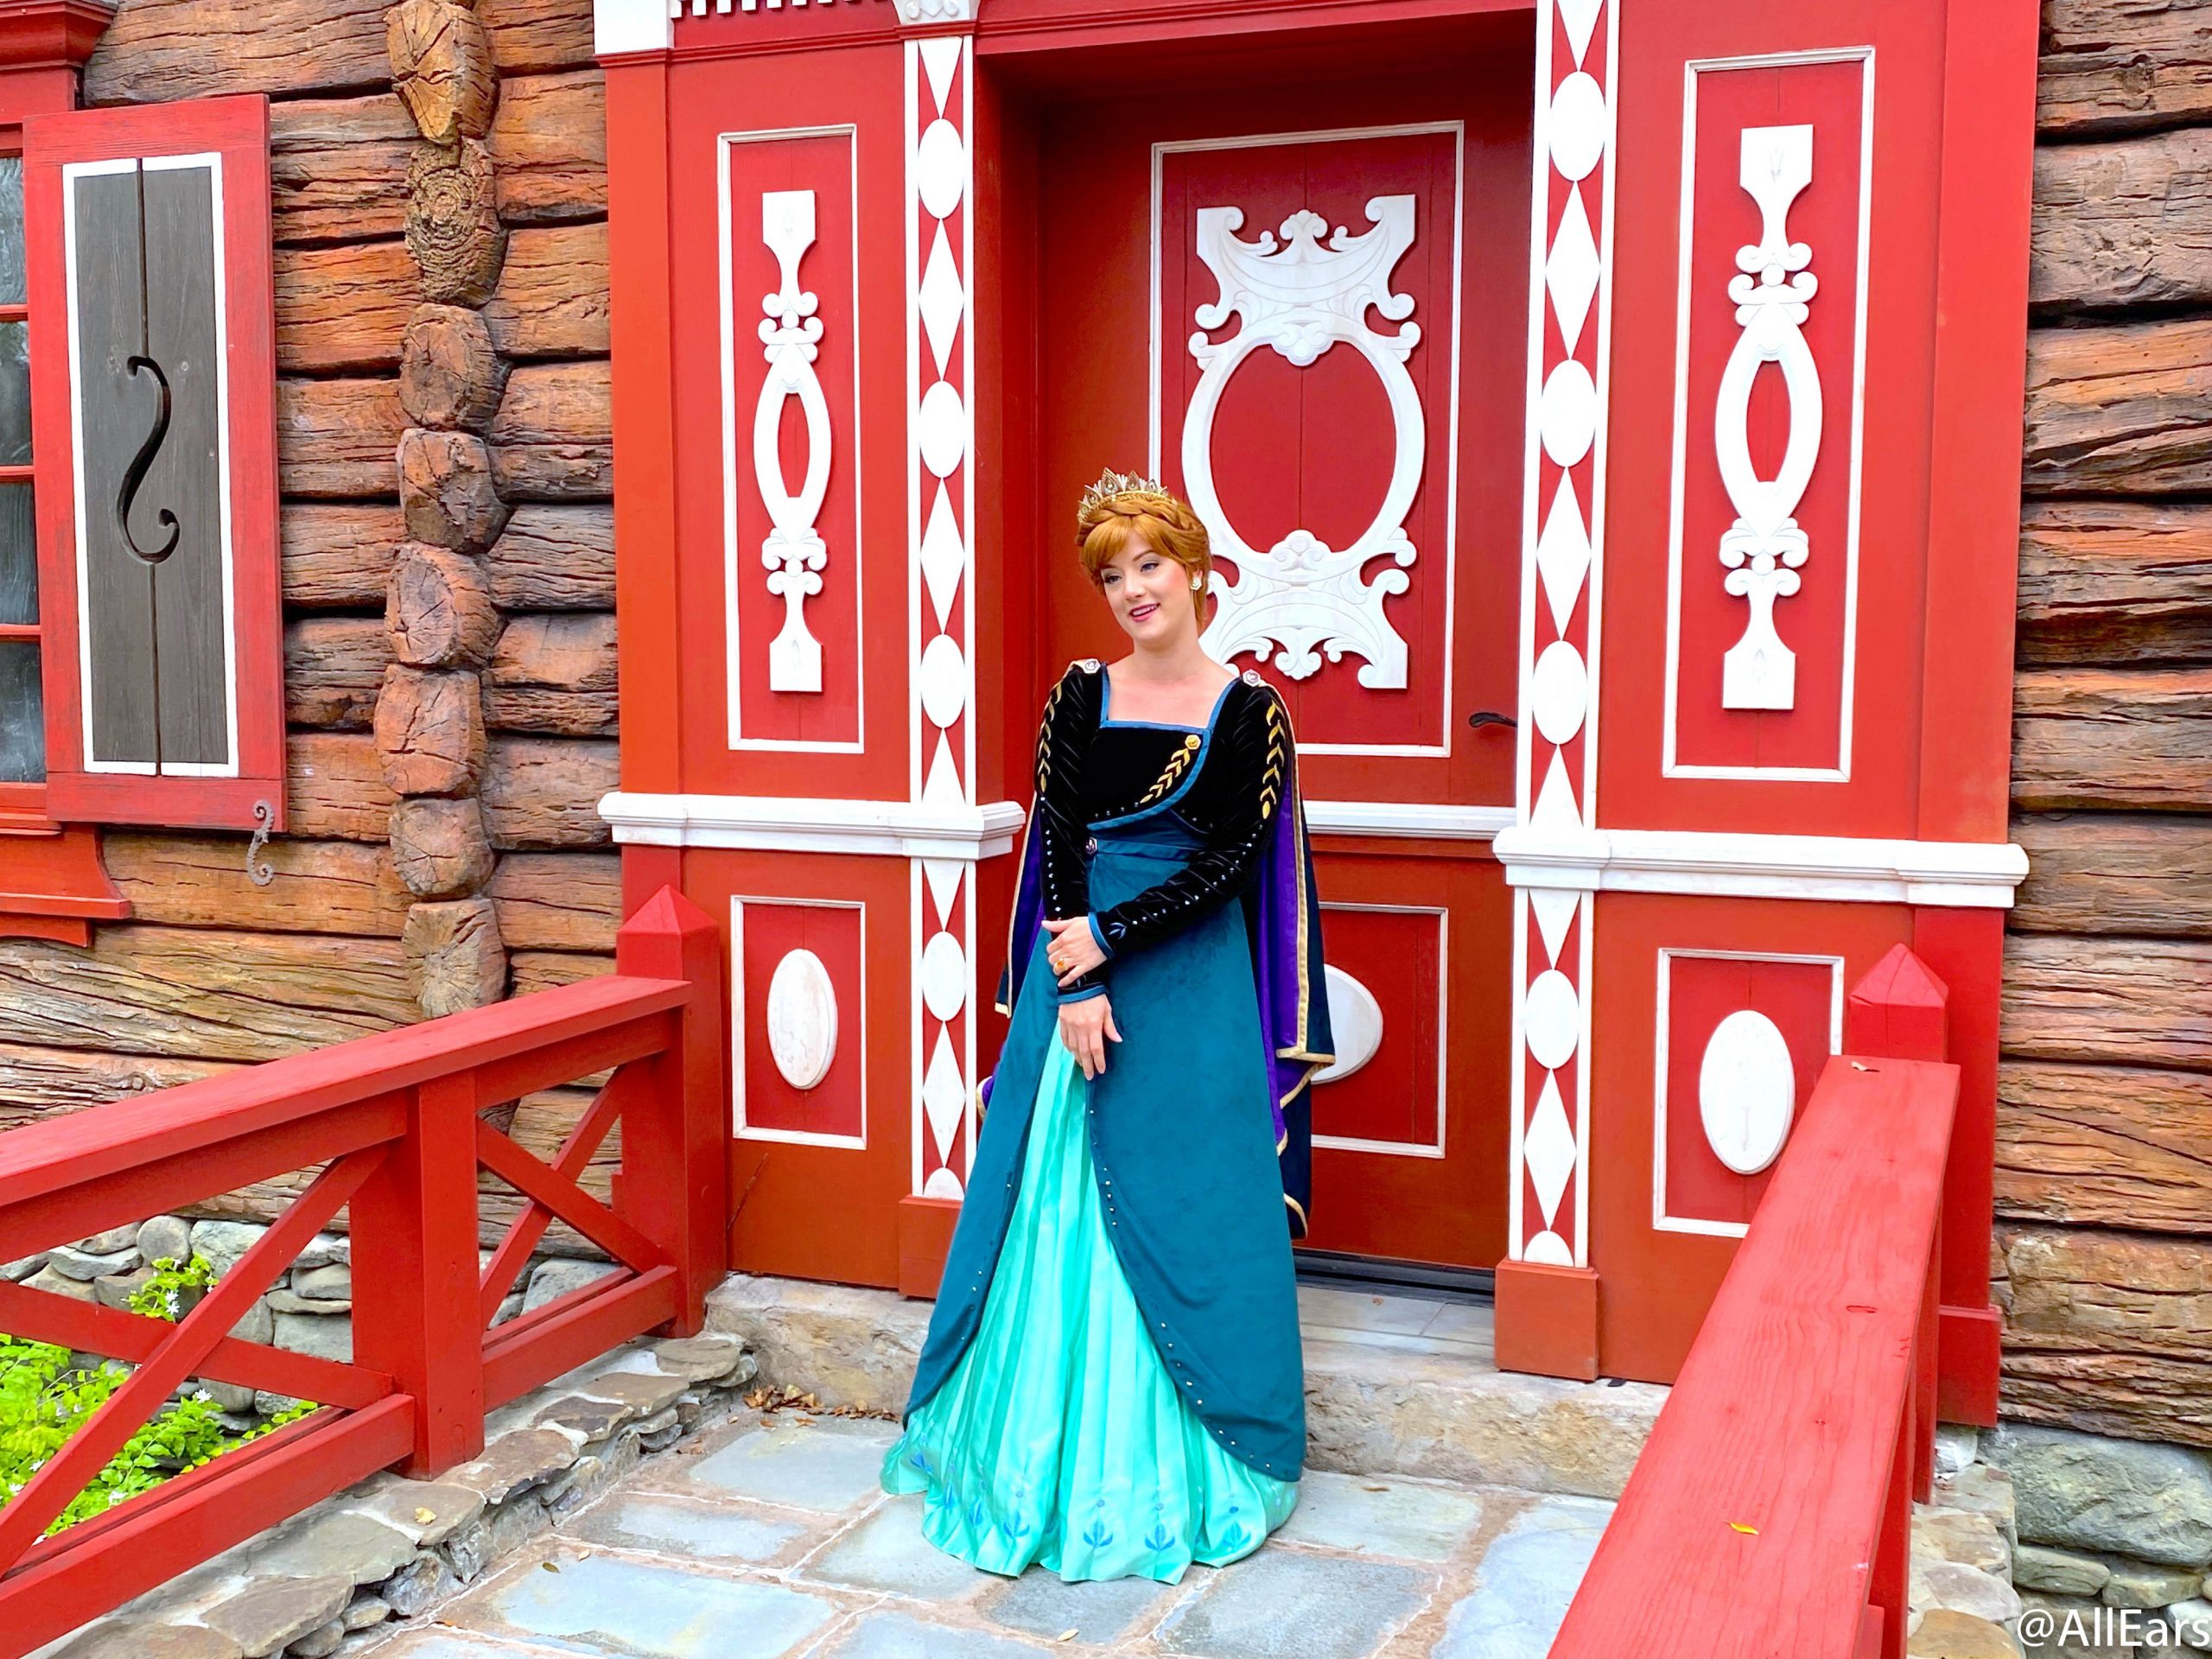 SPOTTED! Elsa and Anna Are Now Welcoming Guests at EPCOT's Royal Sommerhus in Disney - AllEars.Net